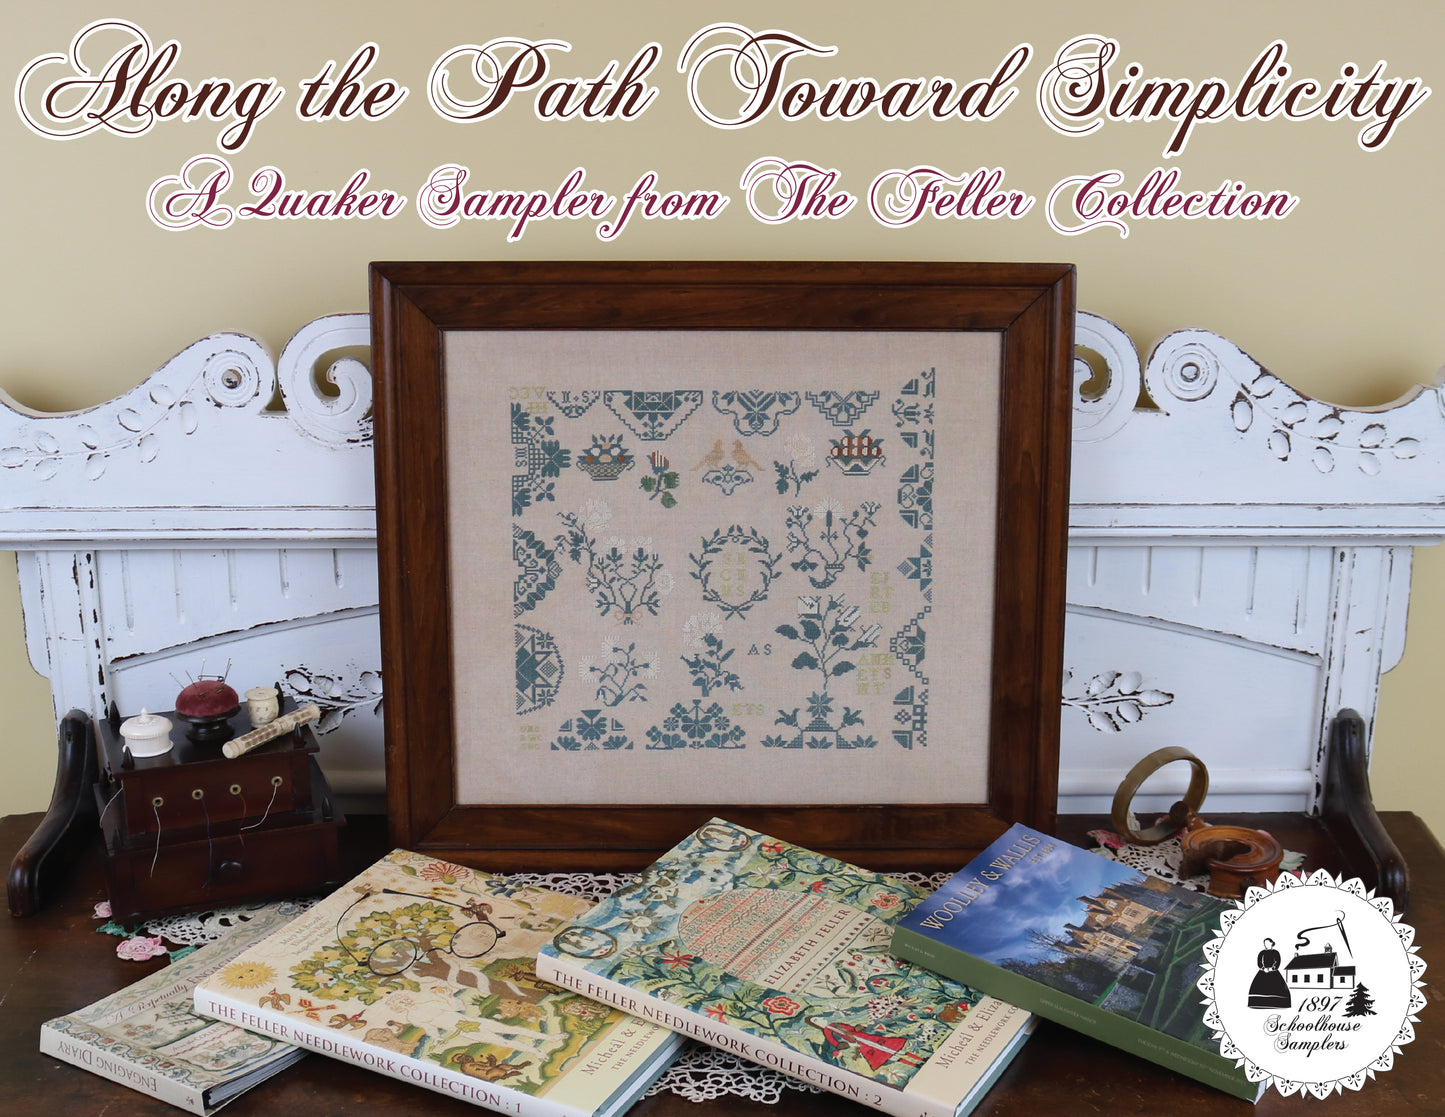 Along the Path Toward Simplicity - Reproduction Sampler Chart by 1897 Schoolhouse Samplers PREORDER